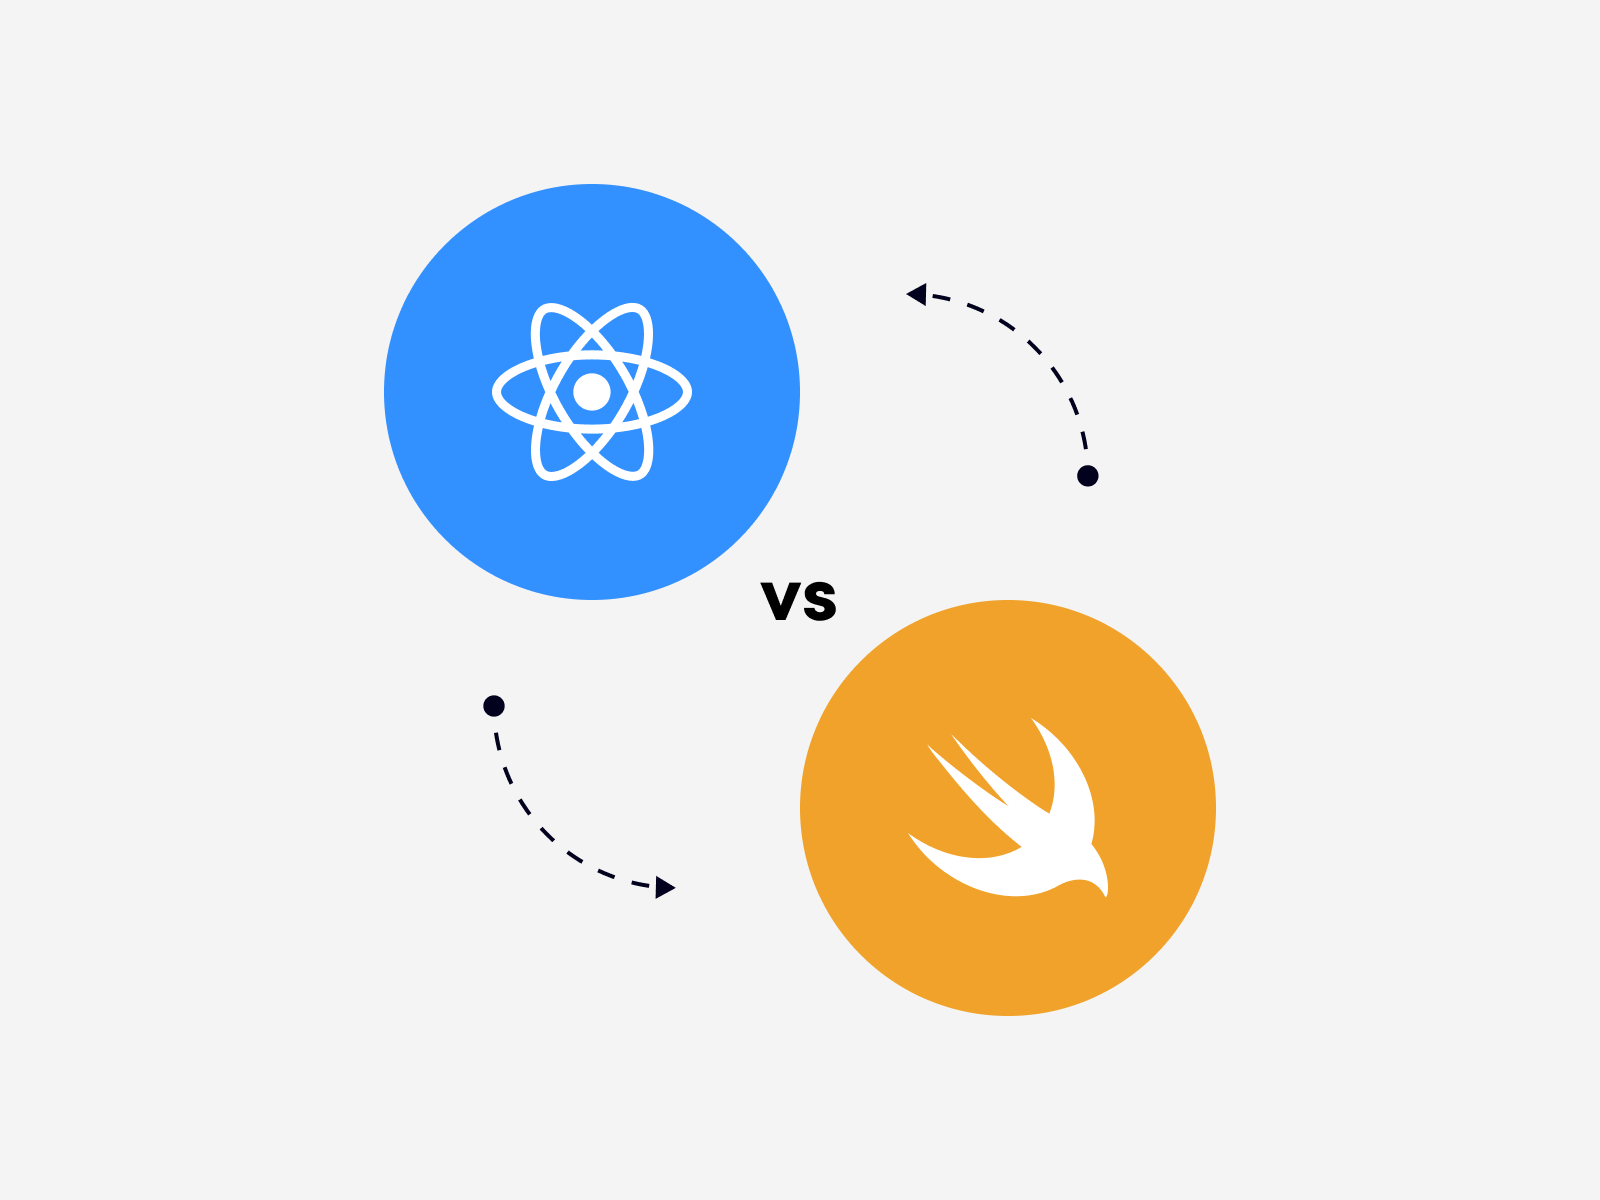 Swift and React Native are two of the most popular technologies for developing iOS apps